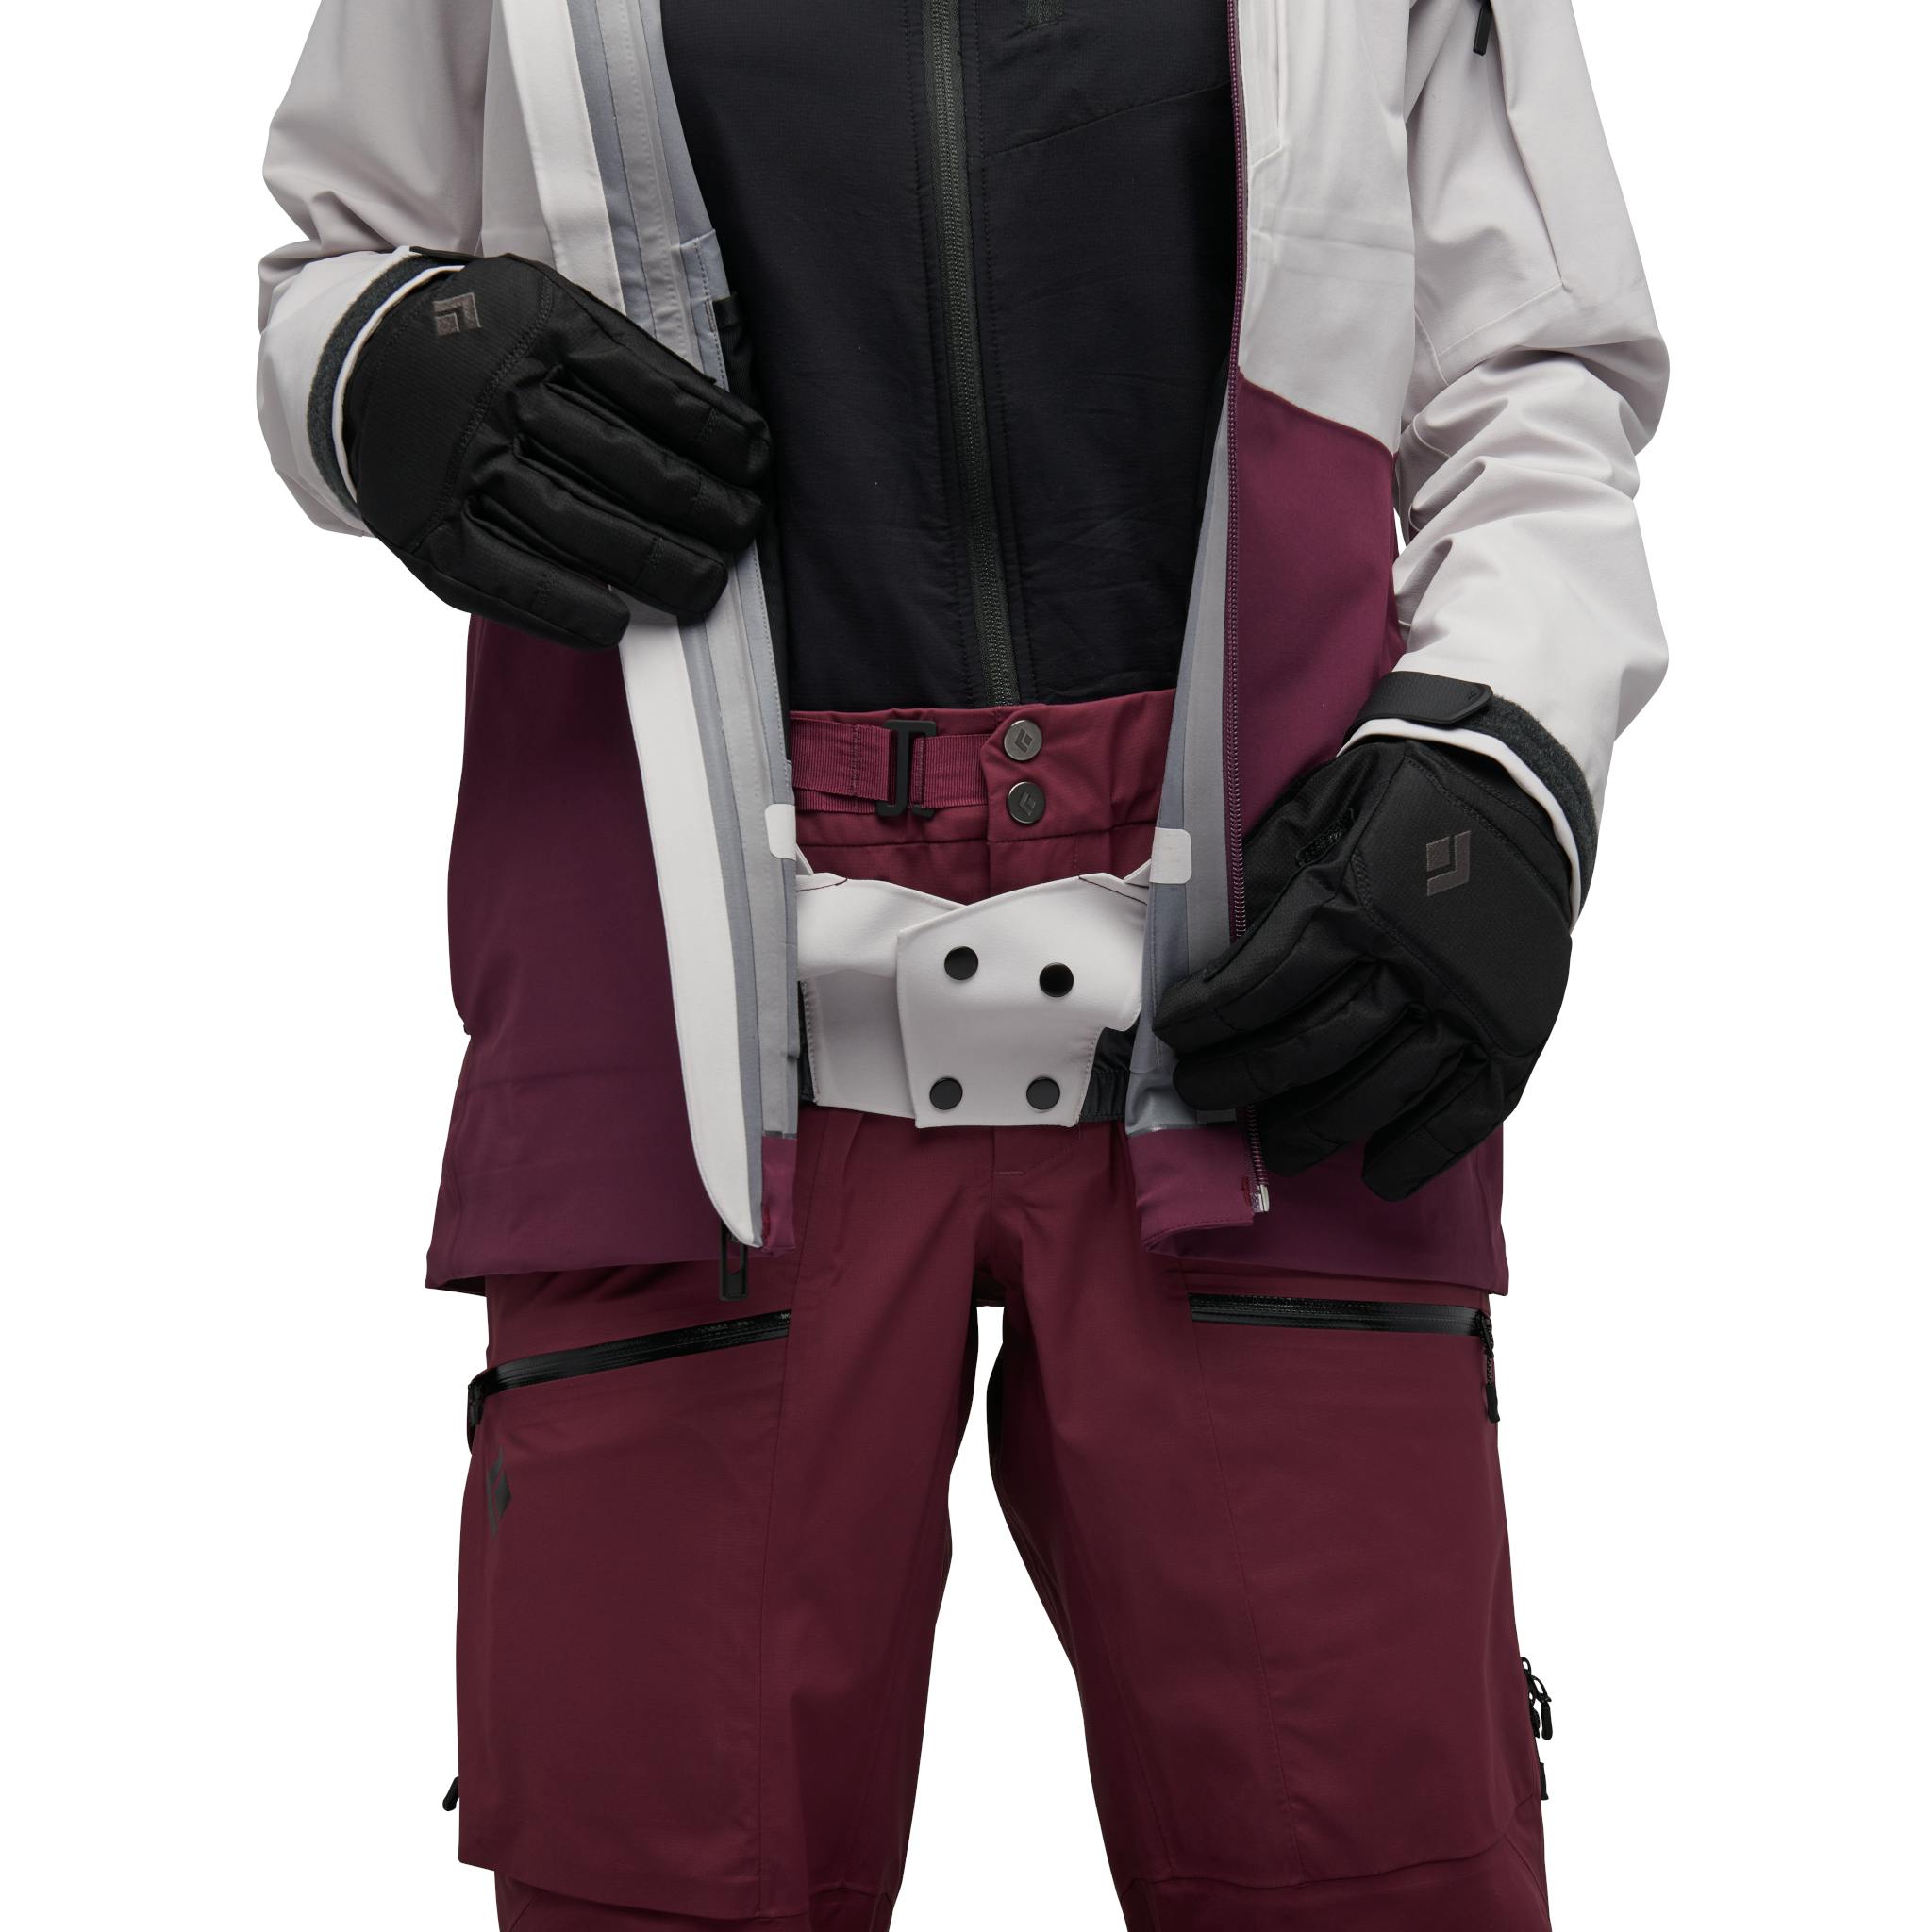 A model adjust the front opening on her pink and maroon Recon Stretch Ski Shell.